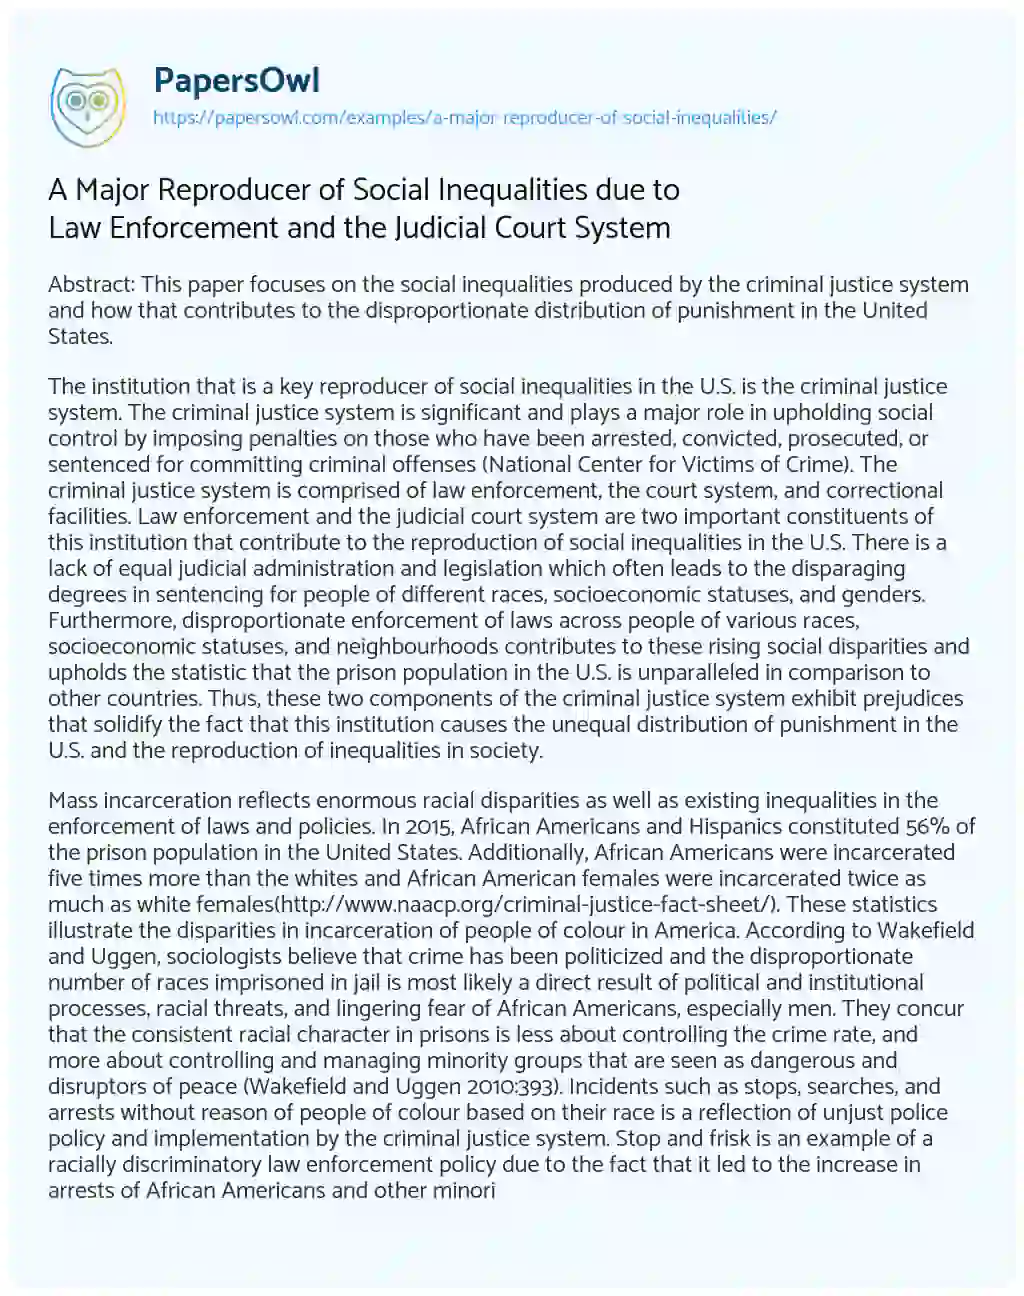 Essay on A Major Reproducer of Social Inequalities Due to Law Enforcement and the Judicial Court System